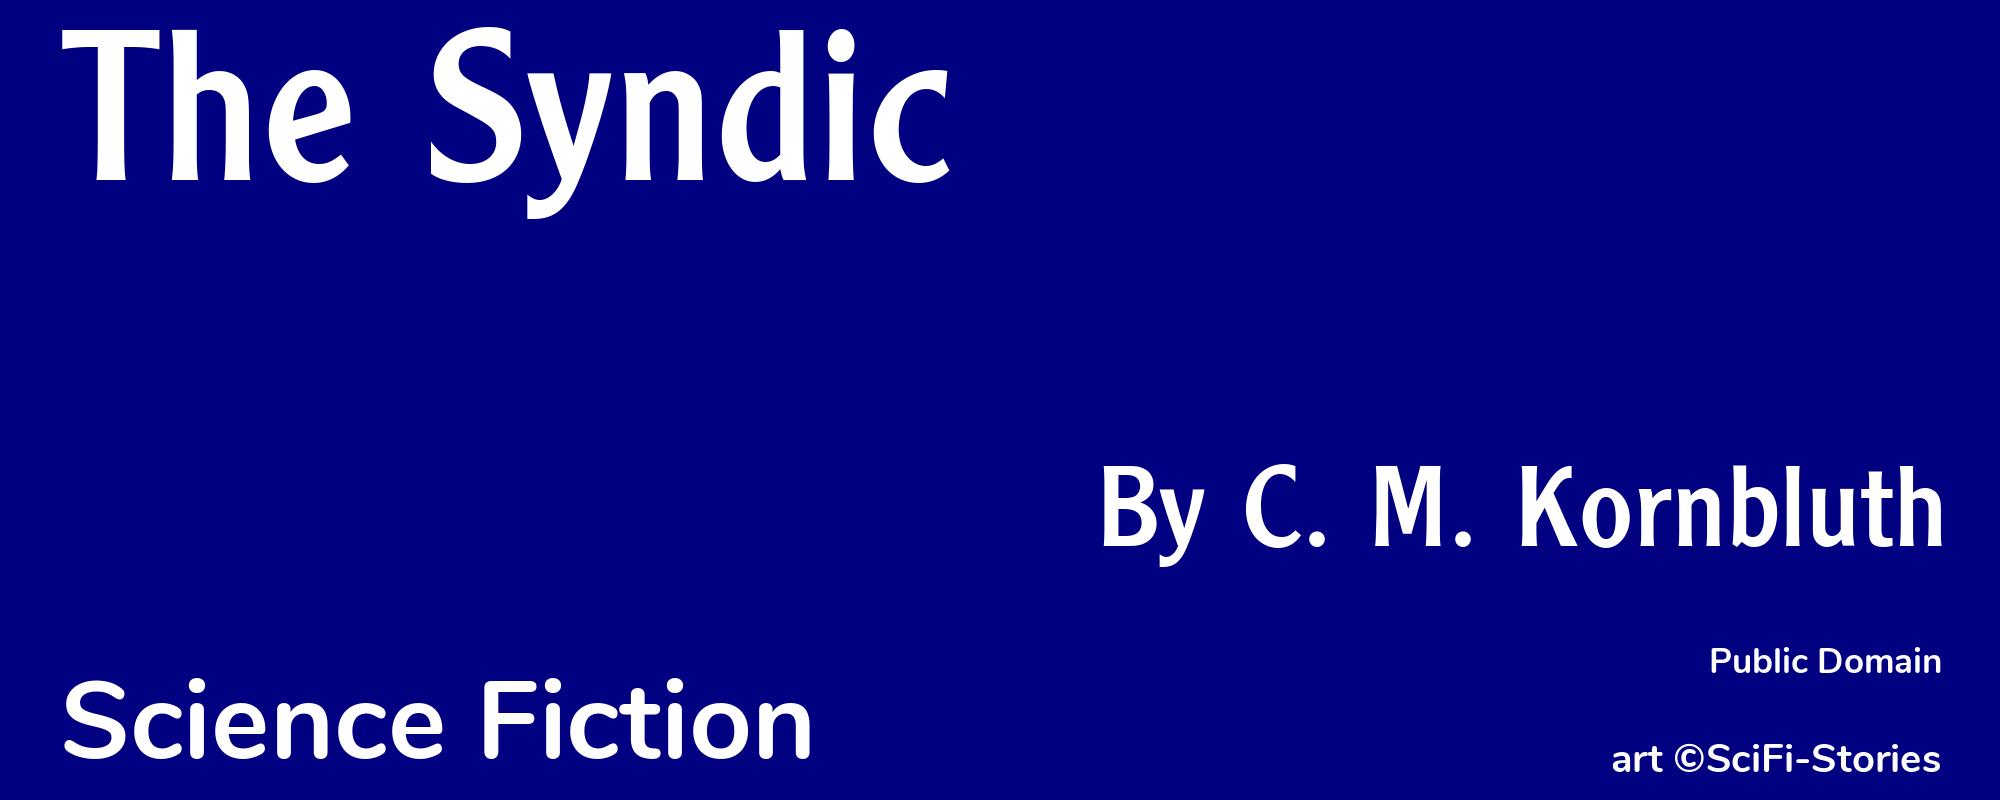 The Syndic - Cover